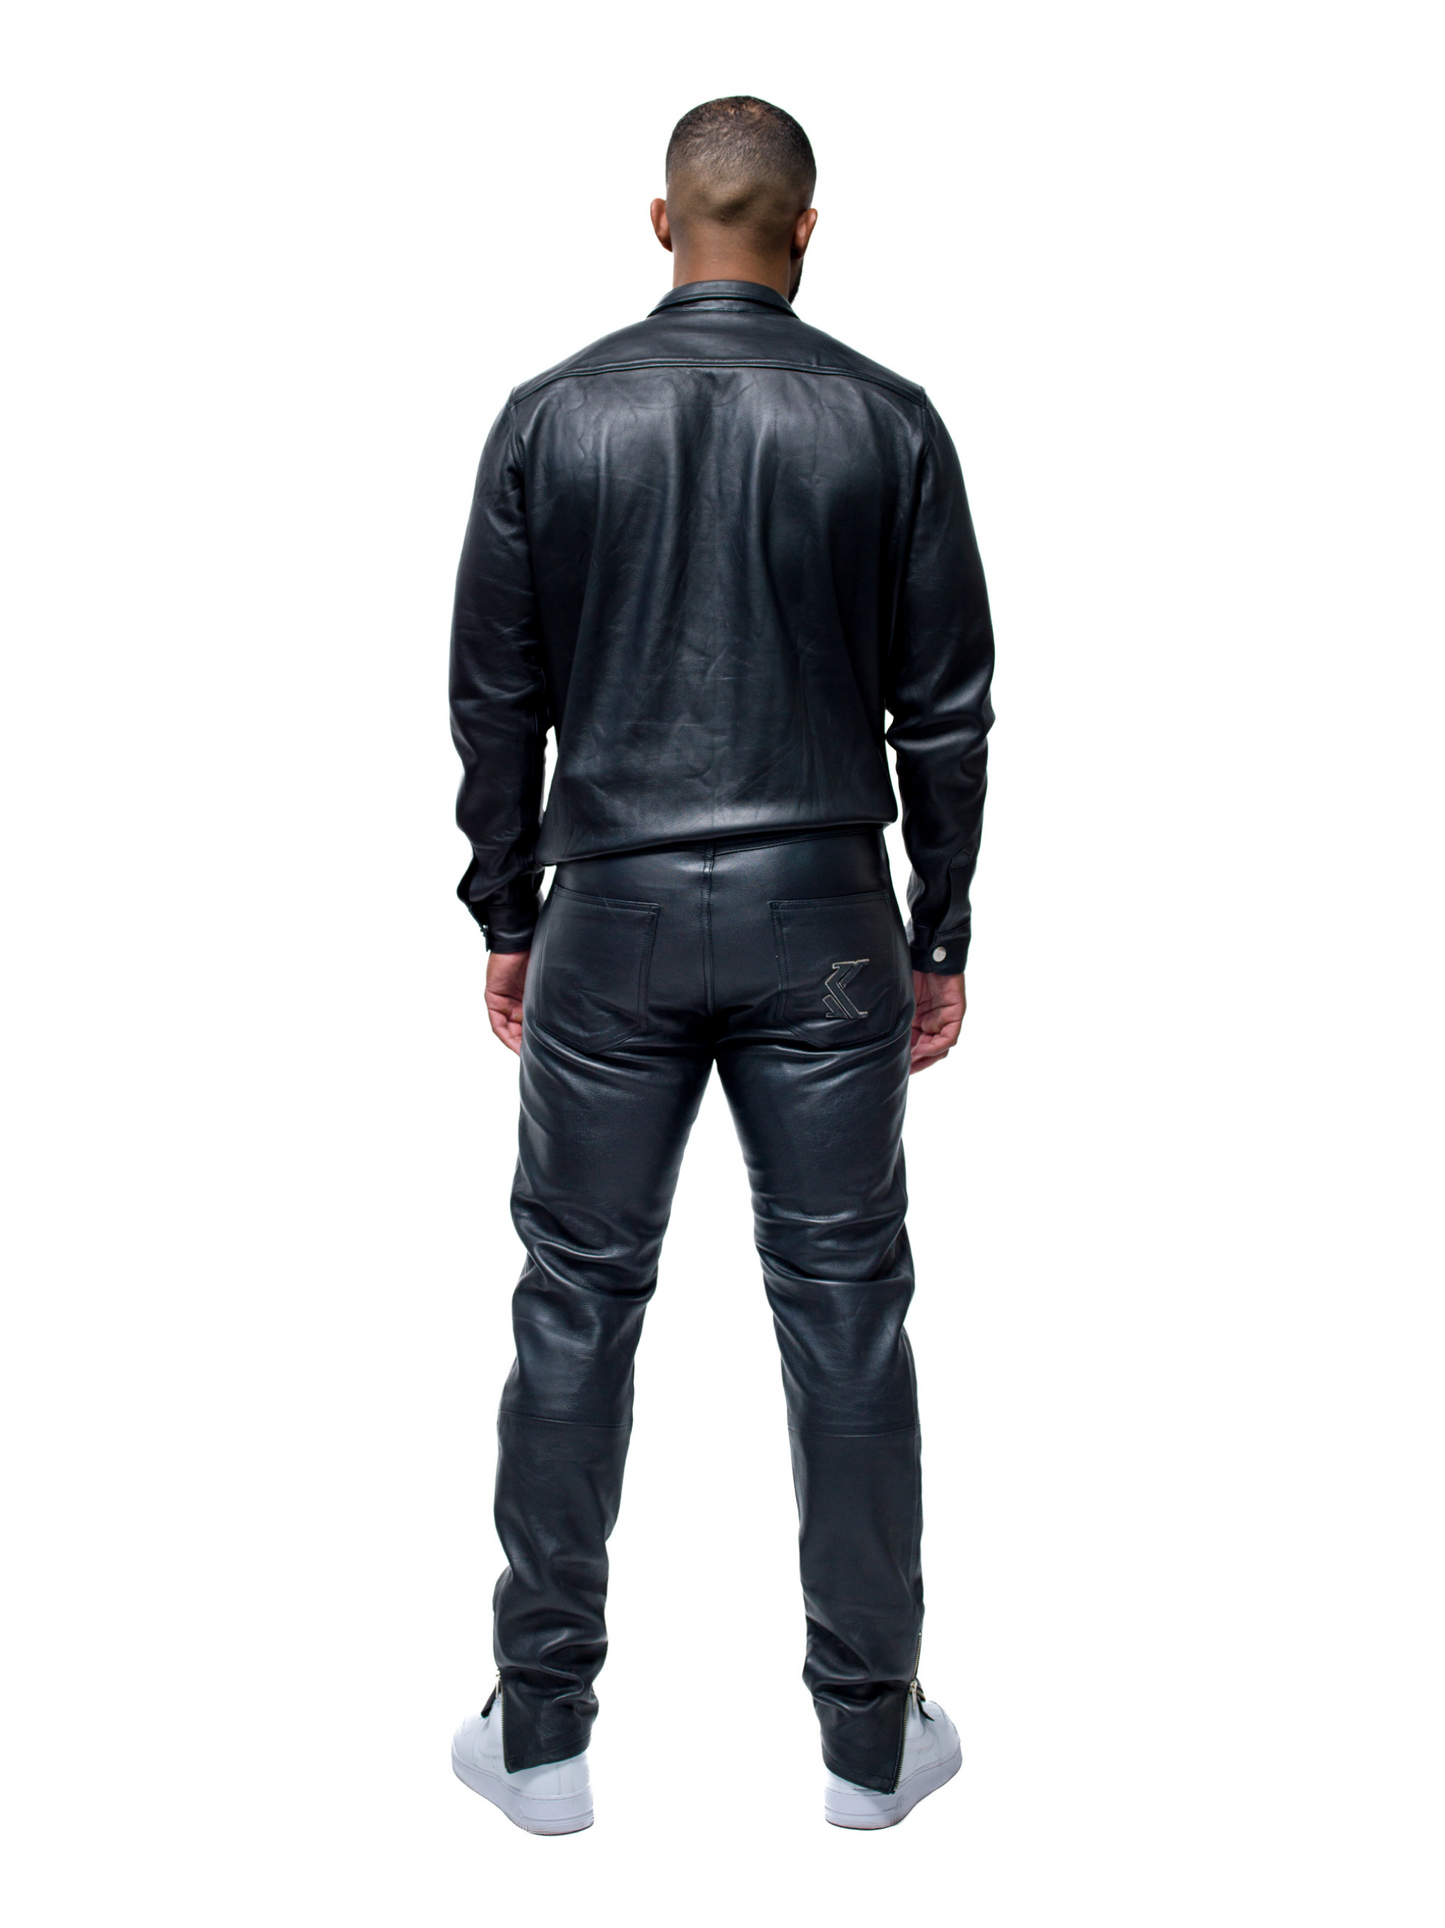 Axel Leather Shirt